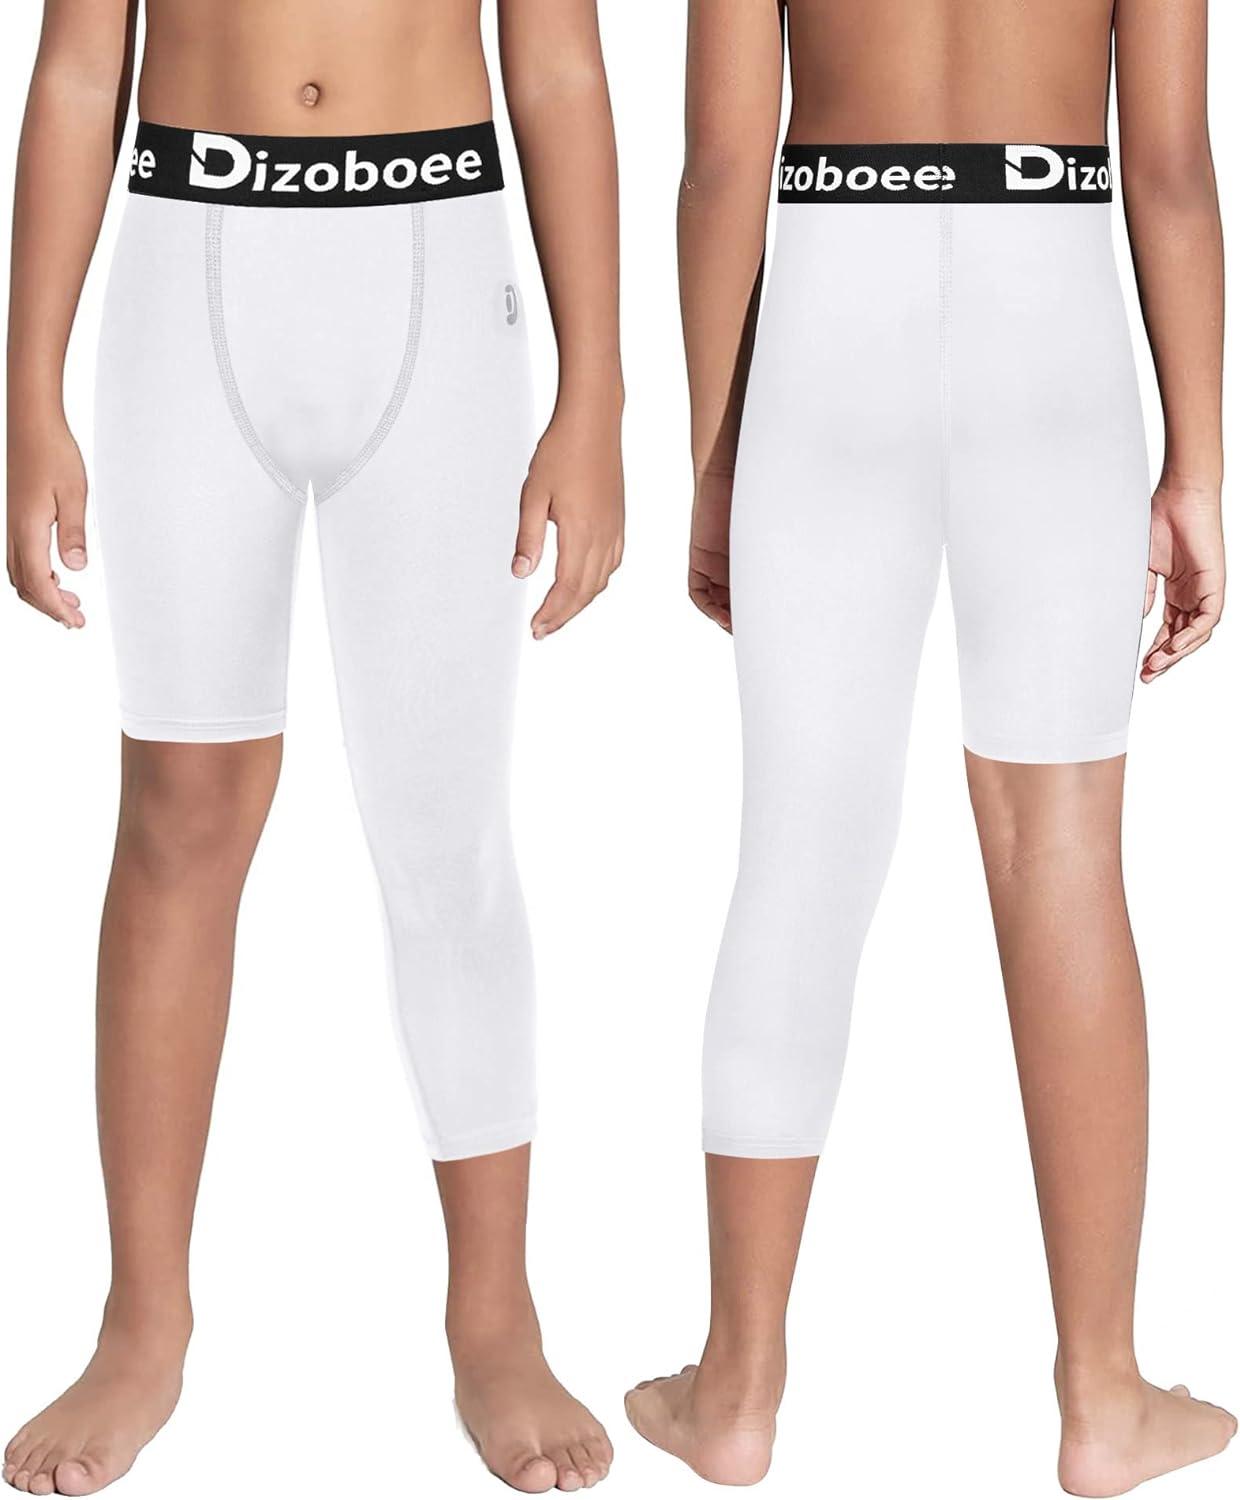 Dizoboee Youth Boys Compression Pants One Leg 3/4 Leggings for Sports Kids Basketball  Tights 2 Pack White+black (Right Short) Medium